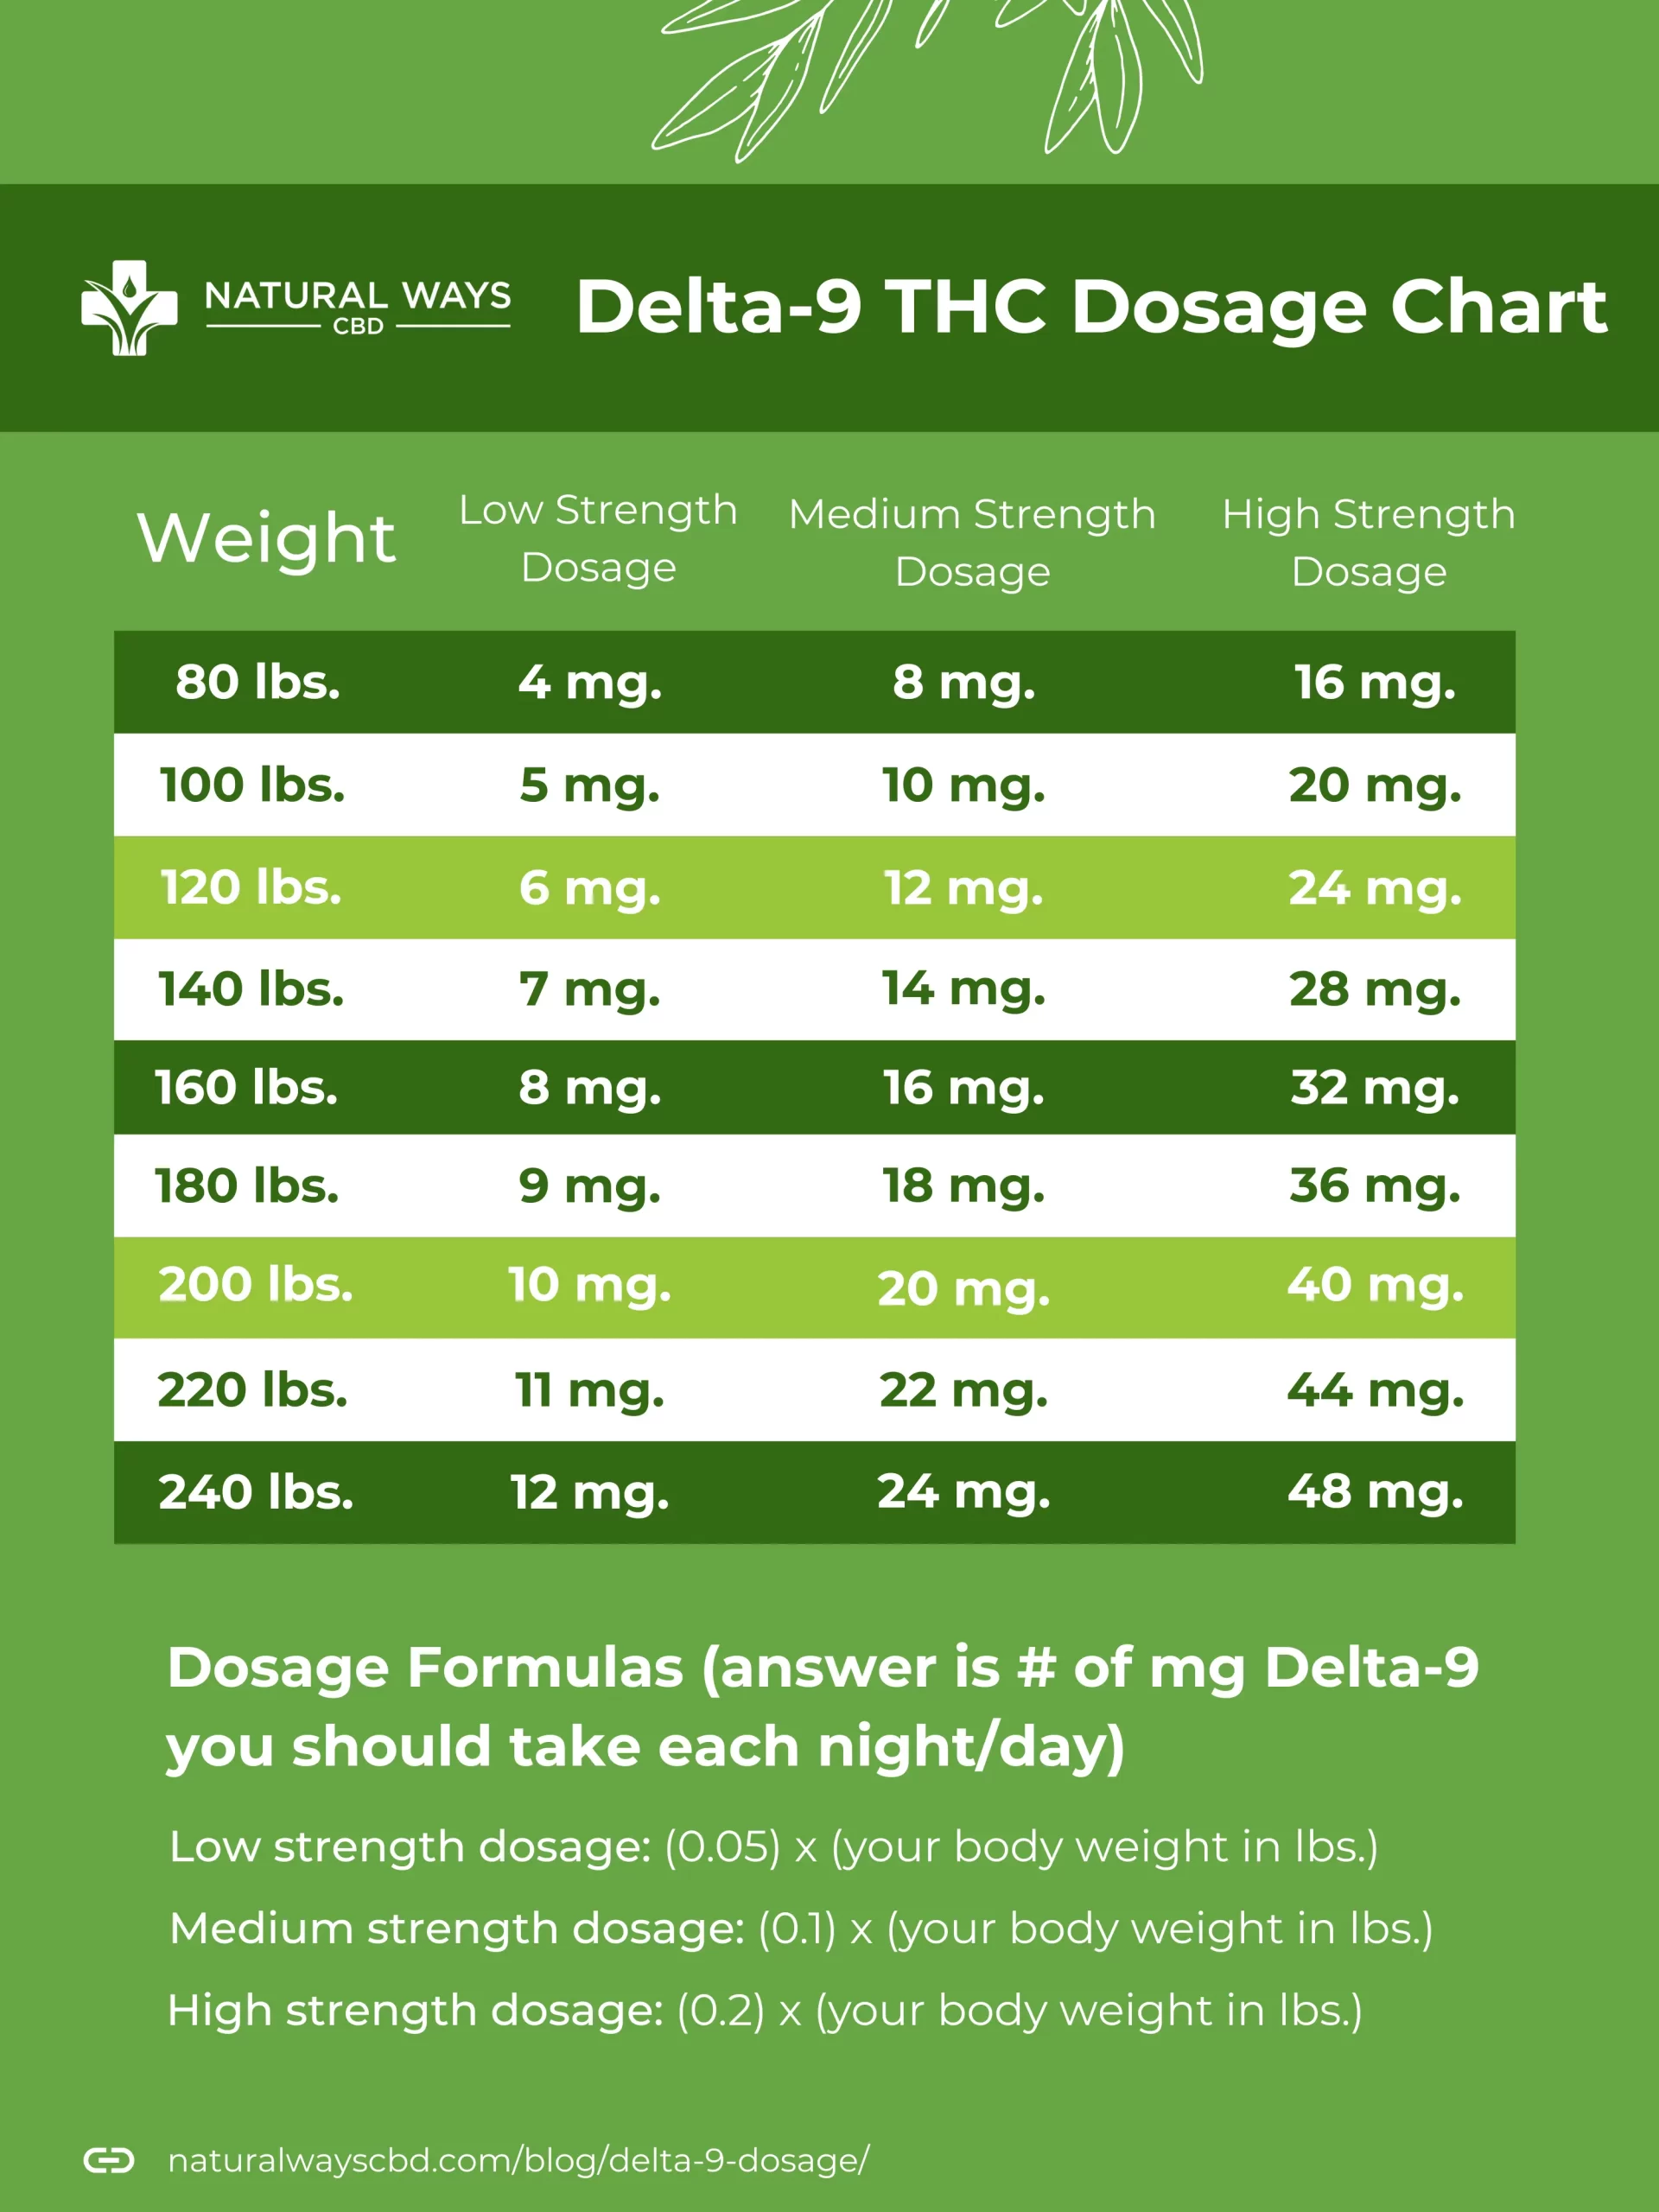 Delta-9 THC dosage chart by weight